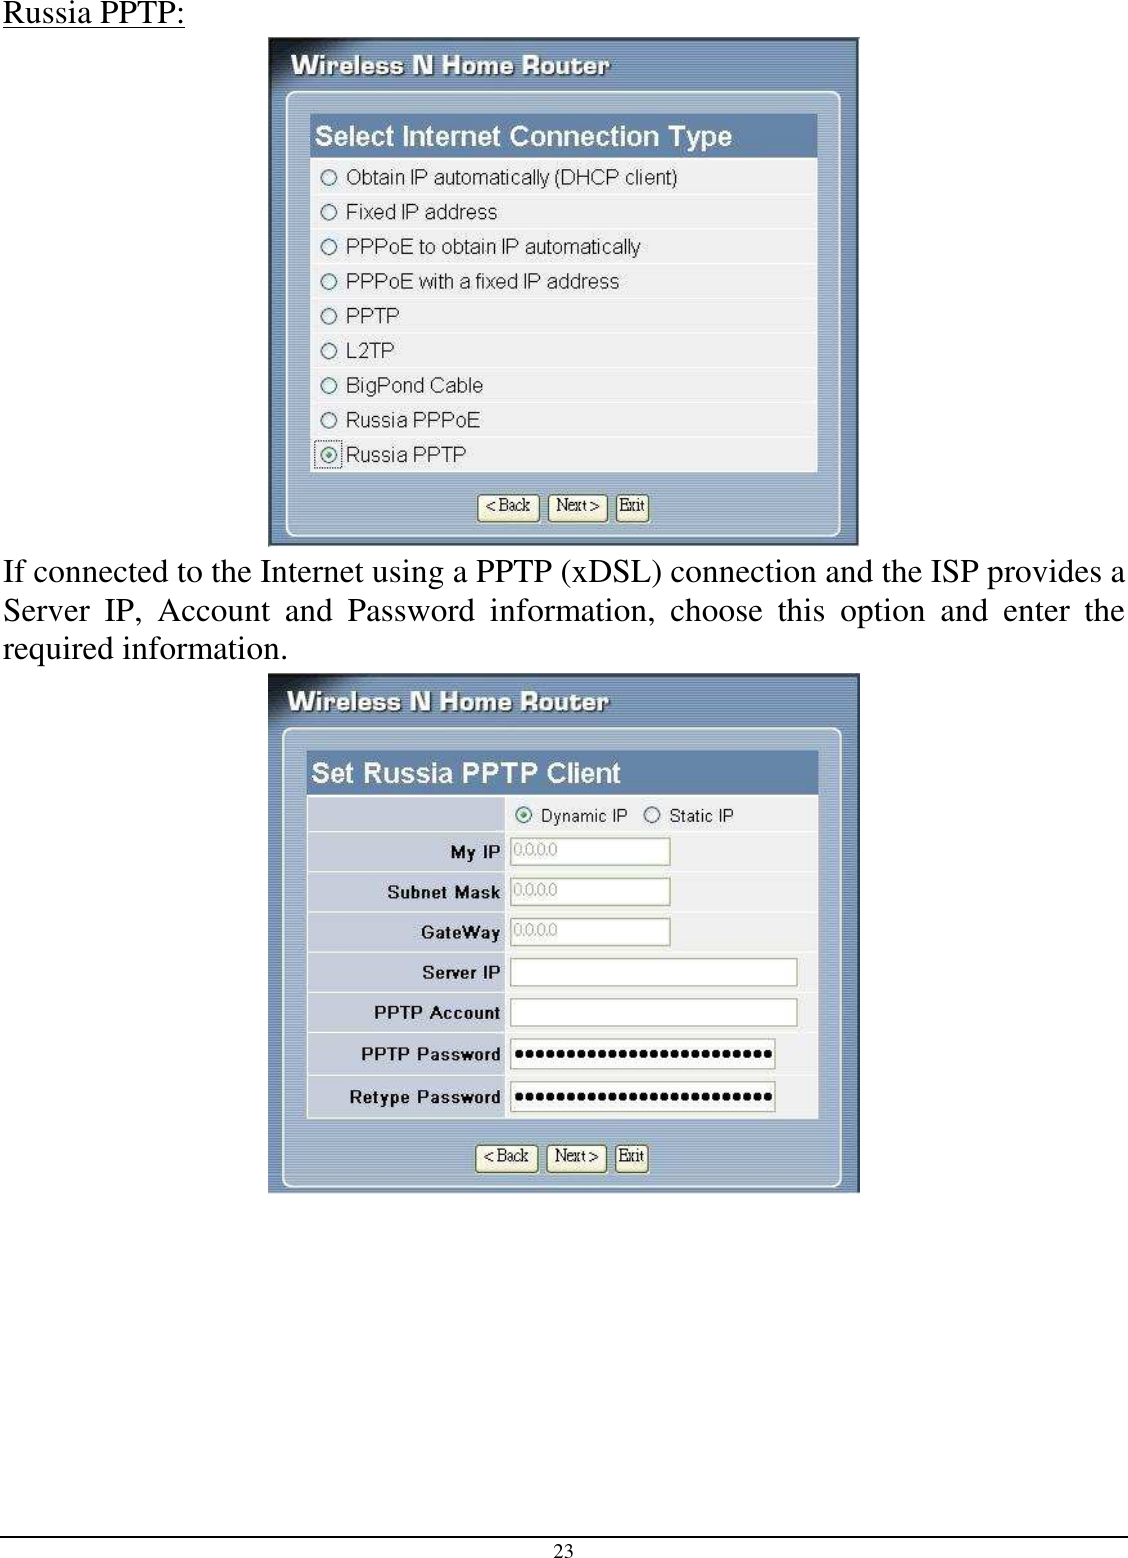 23 Russia PPTP:  If connected to the Internet using a PPTP (xDSL) connection and the ISP provides a Server  IP,  Account  and  Password  information,  choose  this  option  and  enter  the required information.  